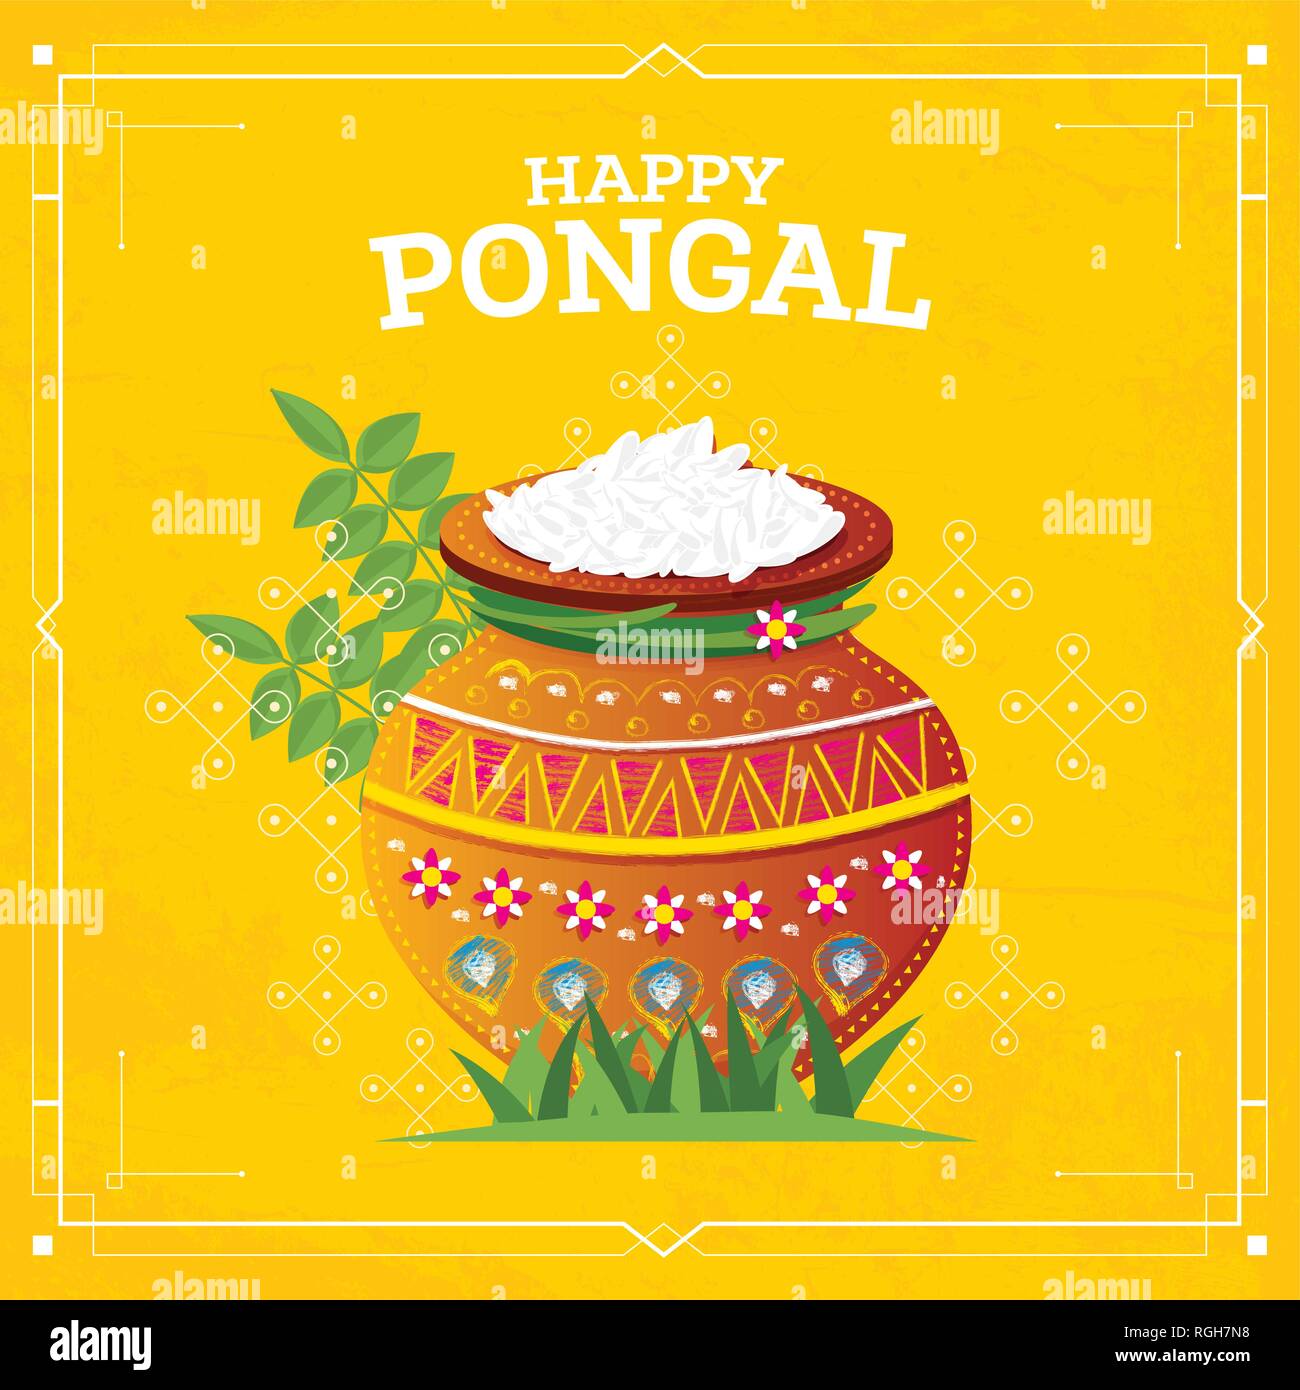 Happy Pongal Harvest Festival of Tamil Nadu South India. Vector ...